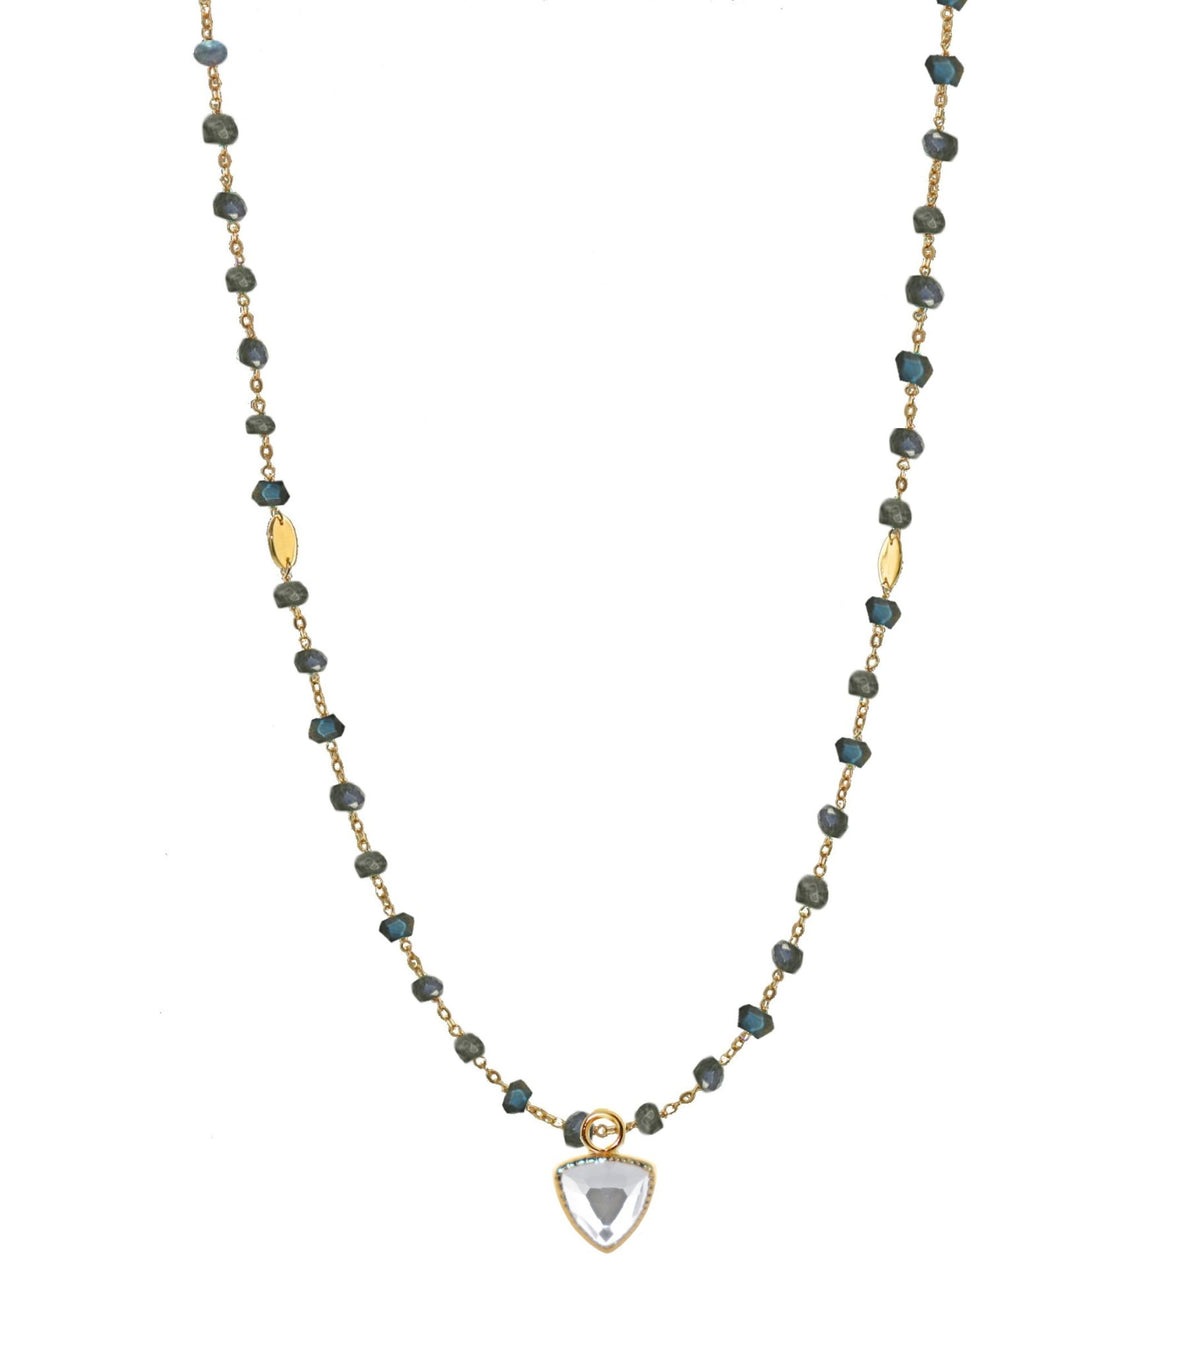 ICONIC LONG BEADED NECKLACE - LABRADORITE &amp; GOLD 34&quot; - SO PRETTY CARA COTTER